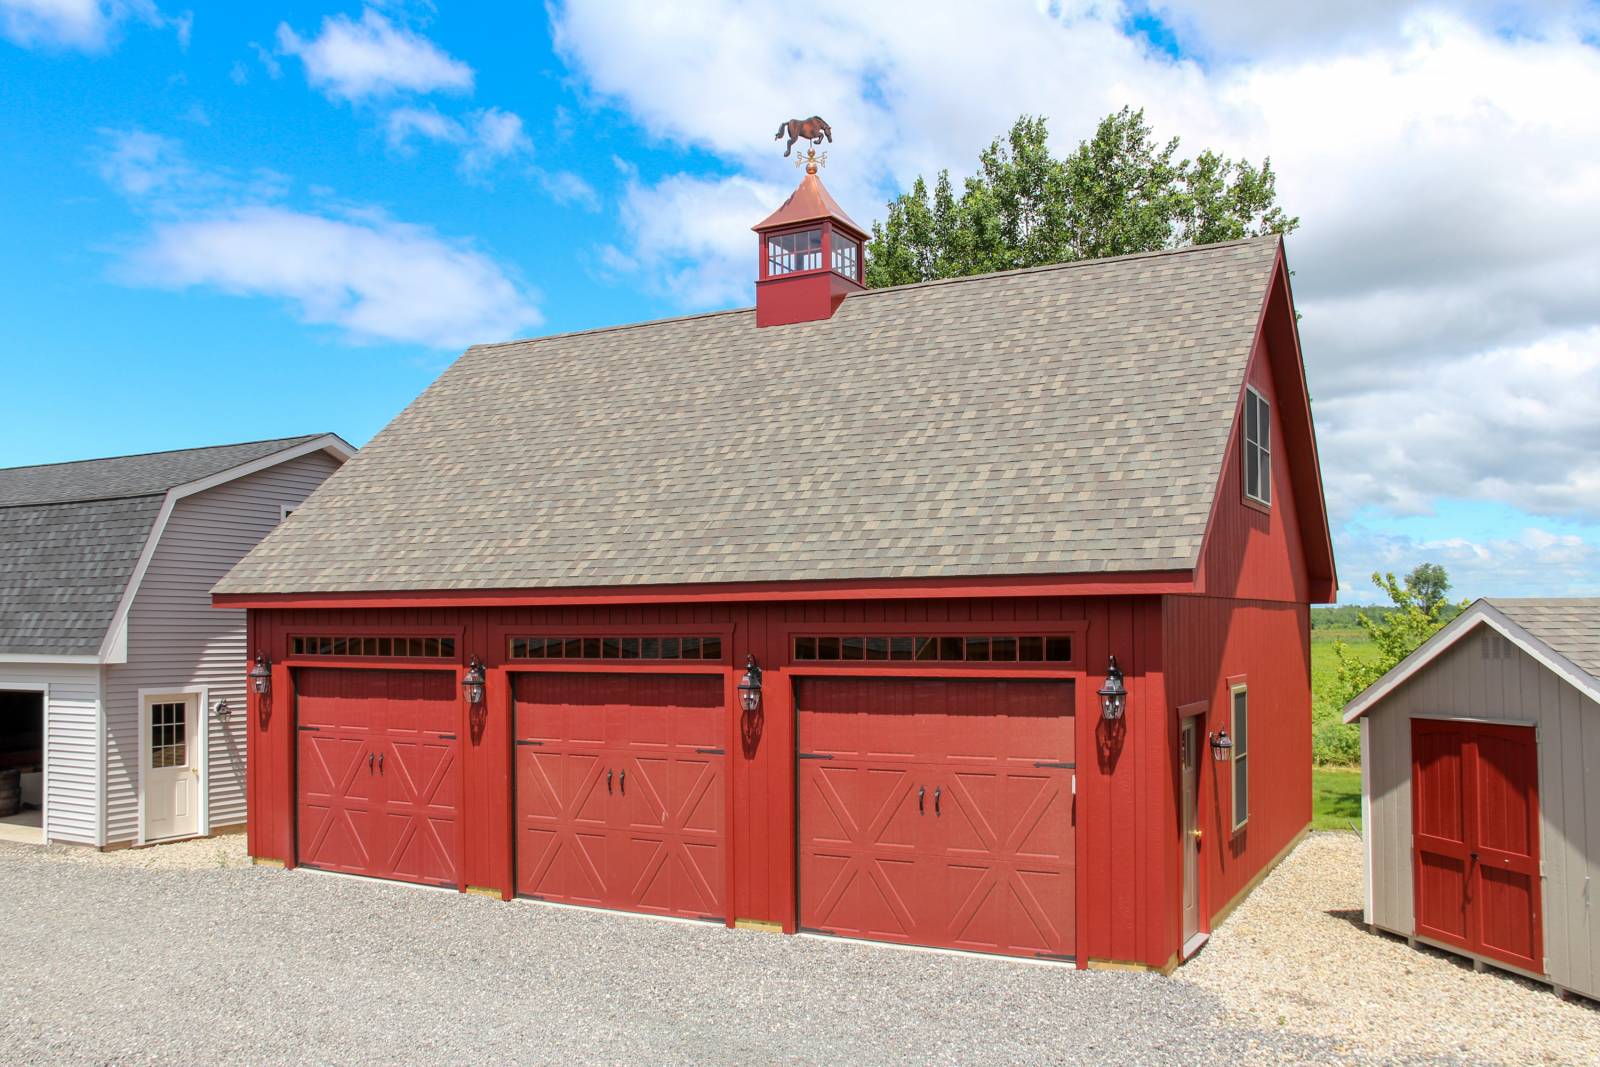 28' x 36' Newport Display Garage - Now Available